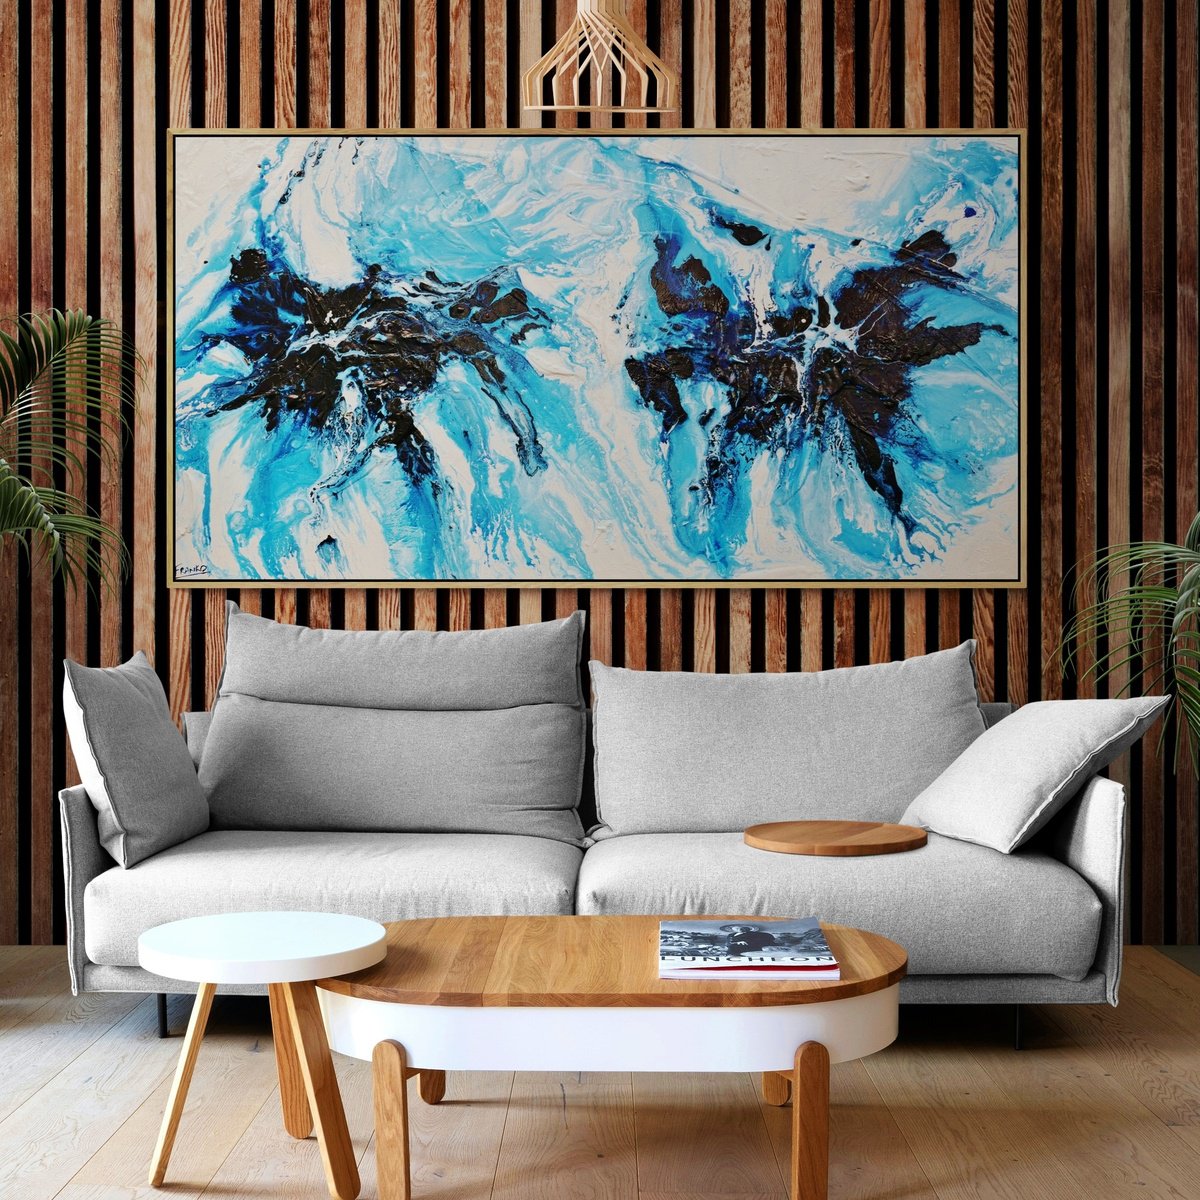 Midnight Ice 190cm x 100cm Textured Abstract Art by Franko